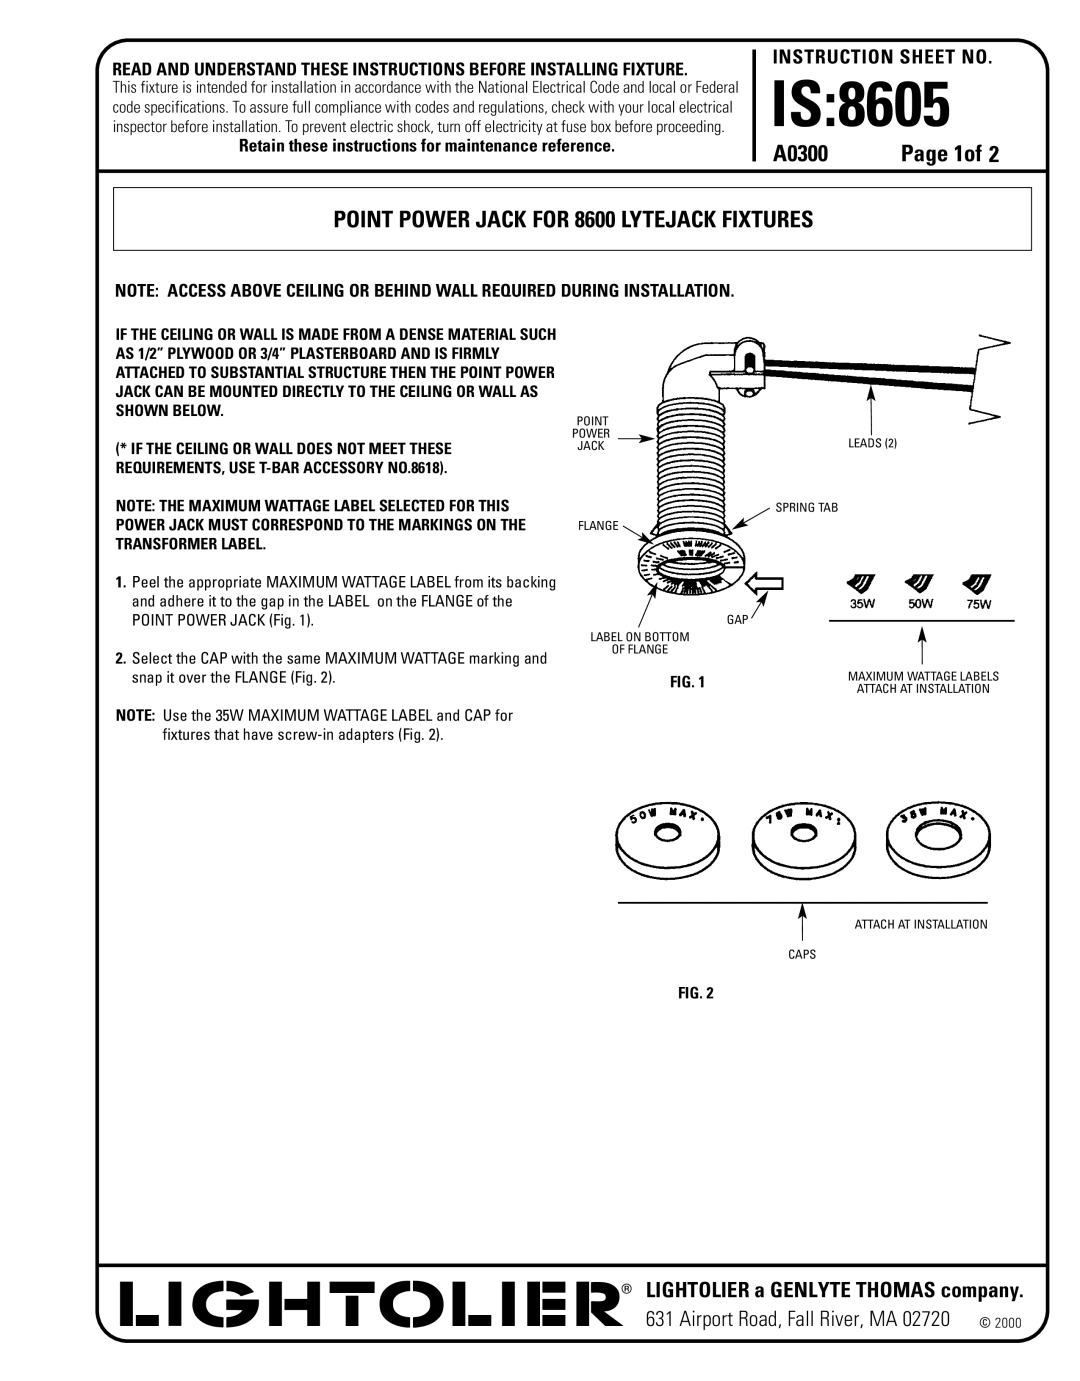 Lightolier 8605 instruction sheet Is, A0300, POINT POWER JACK FOR 8600 LYTEJACK FIXTURES, Instruction Sheet No, Page 1of 